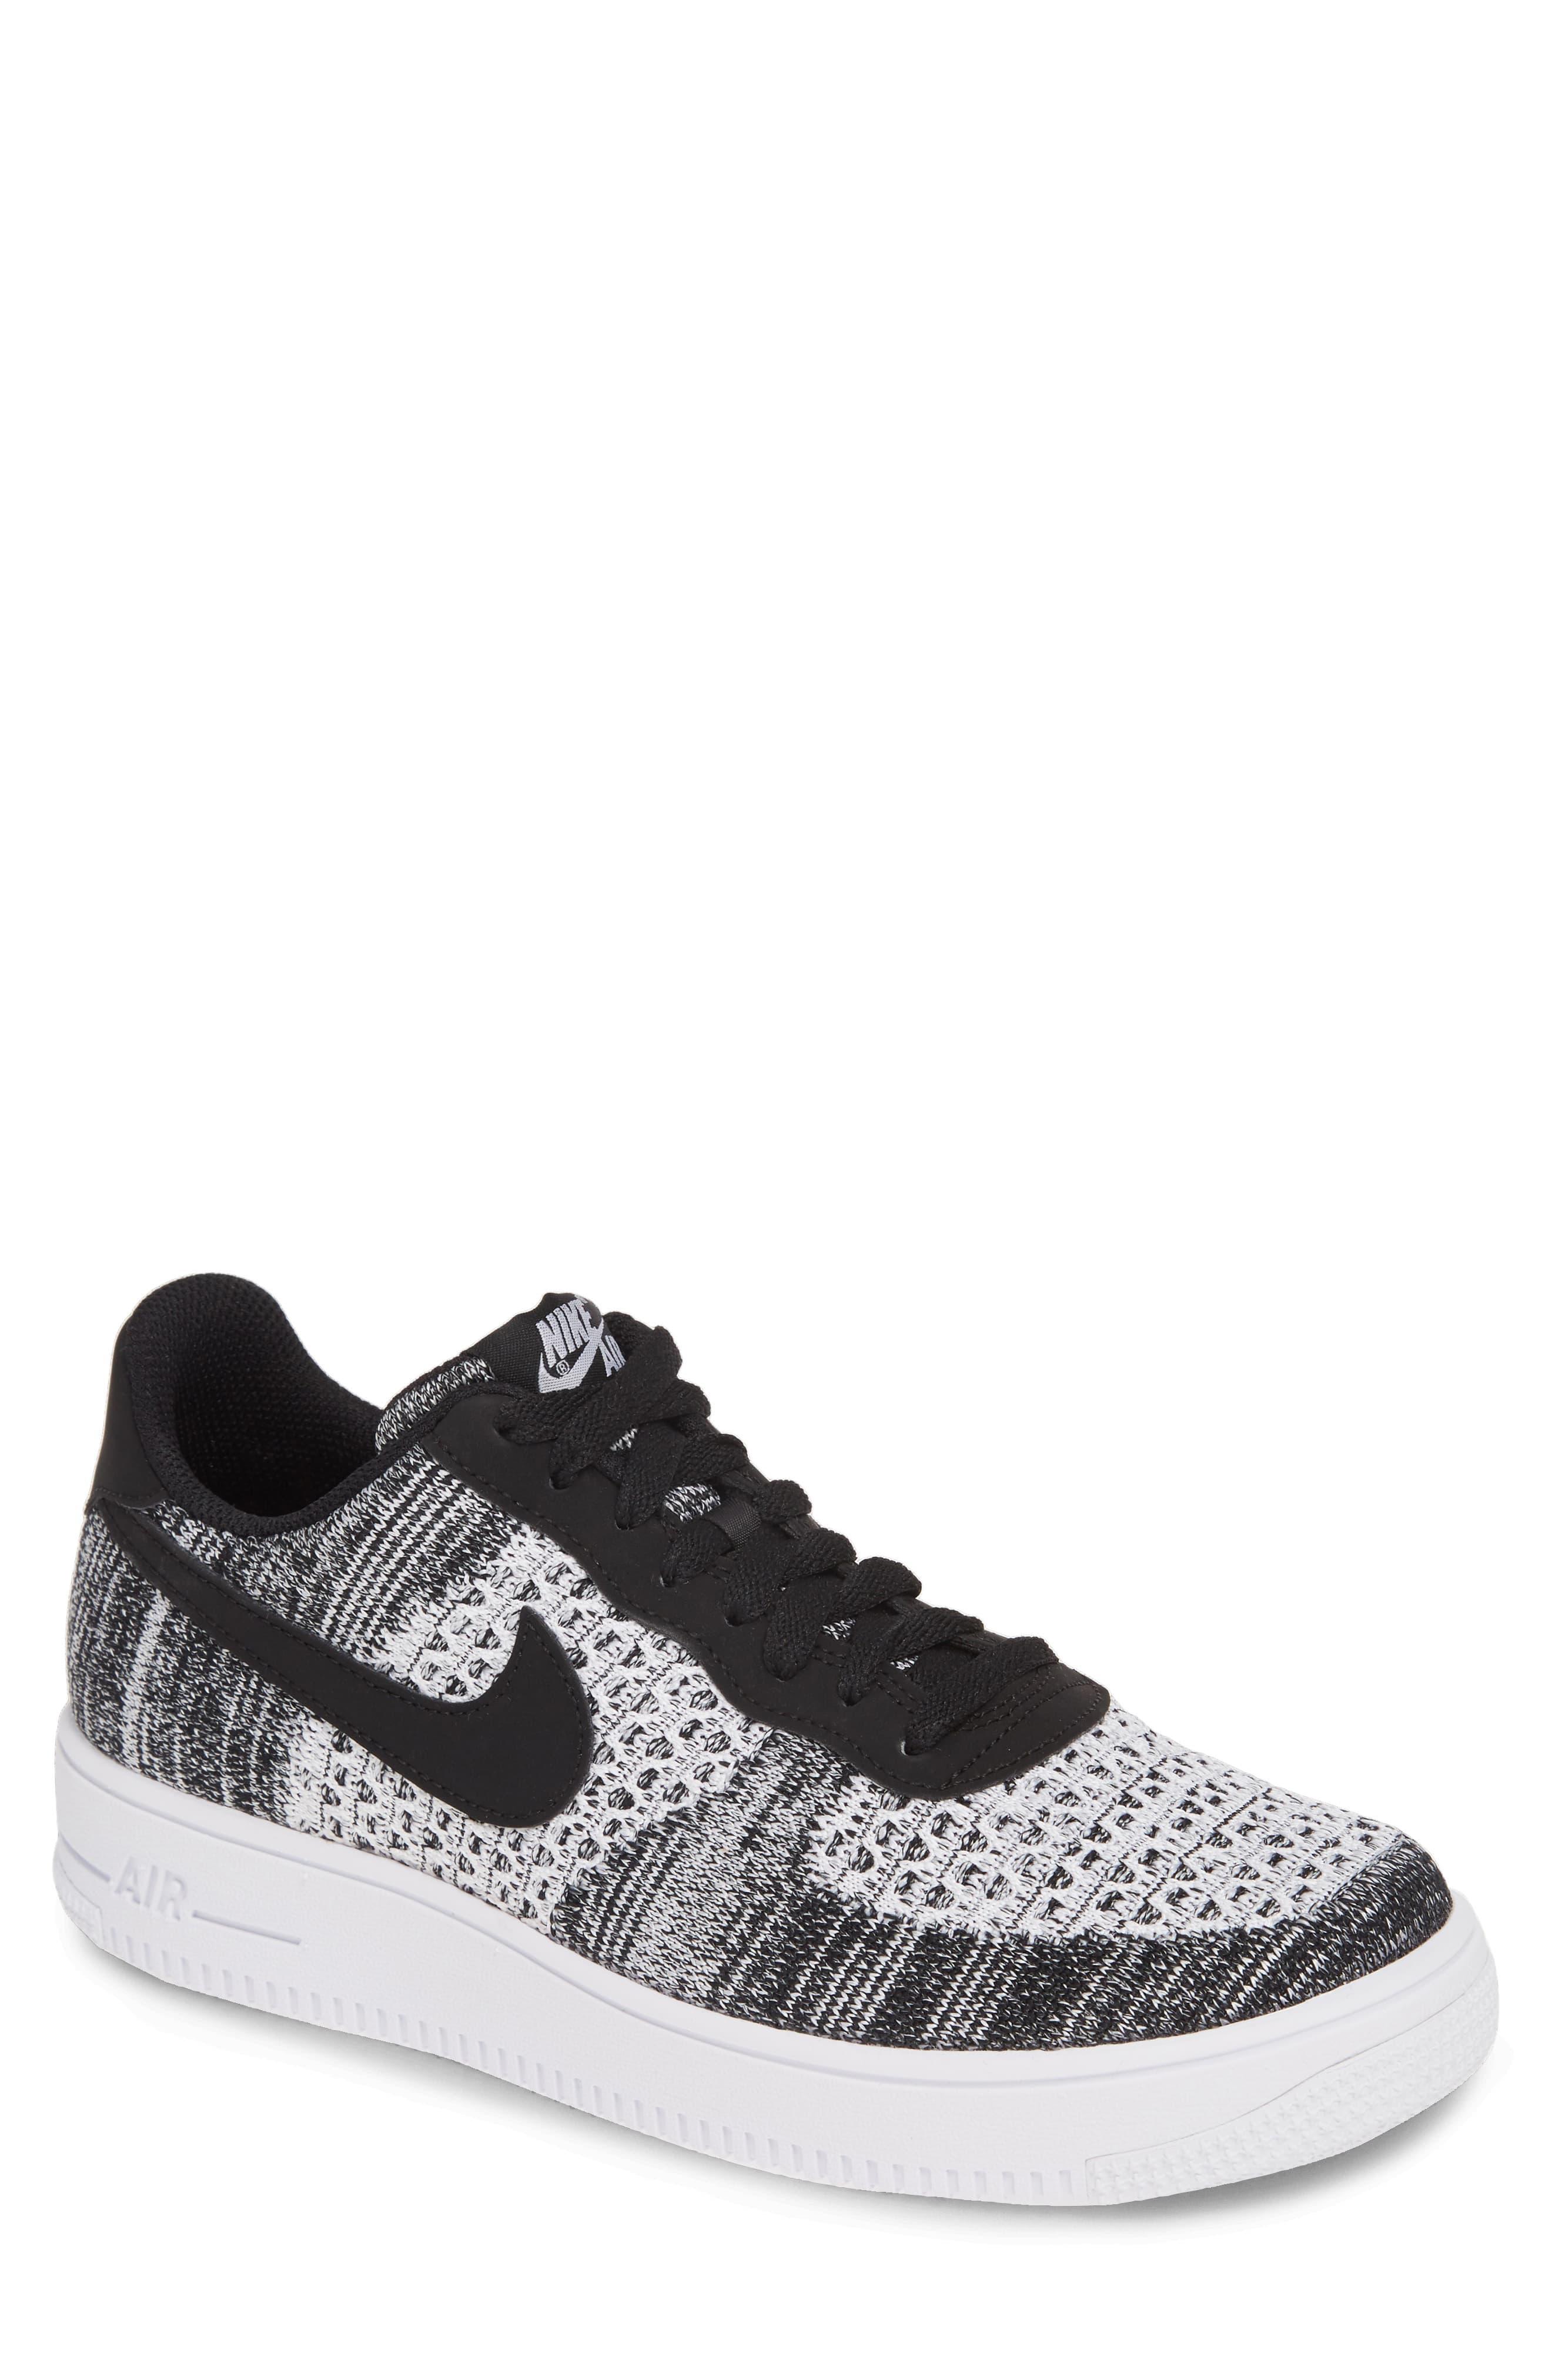 Nike Men's Air Force 1 Ultra Flyknit Low Skate Shoes